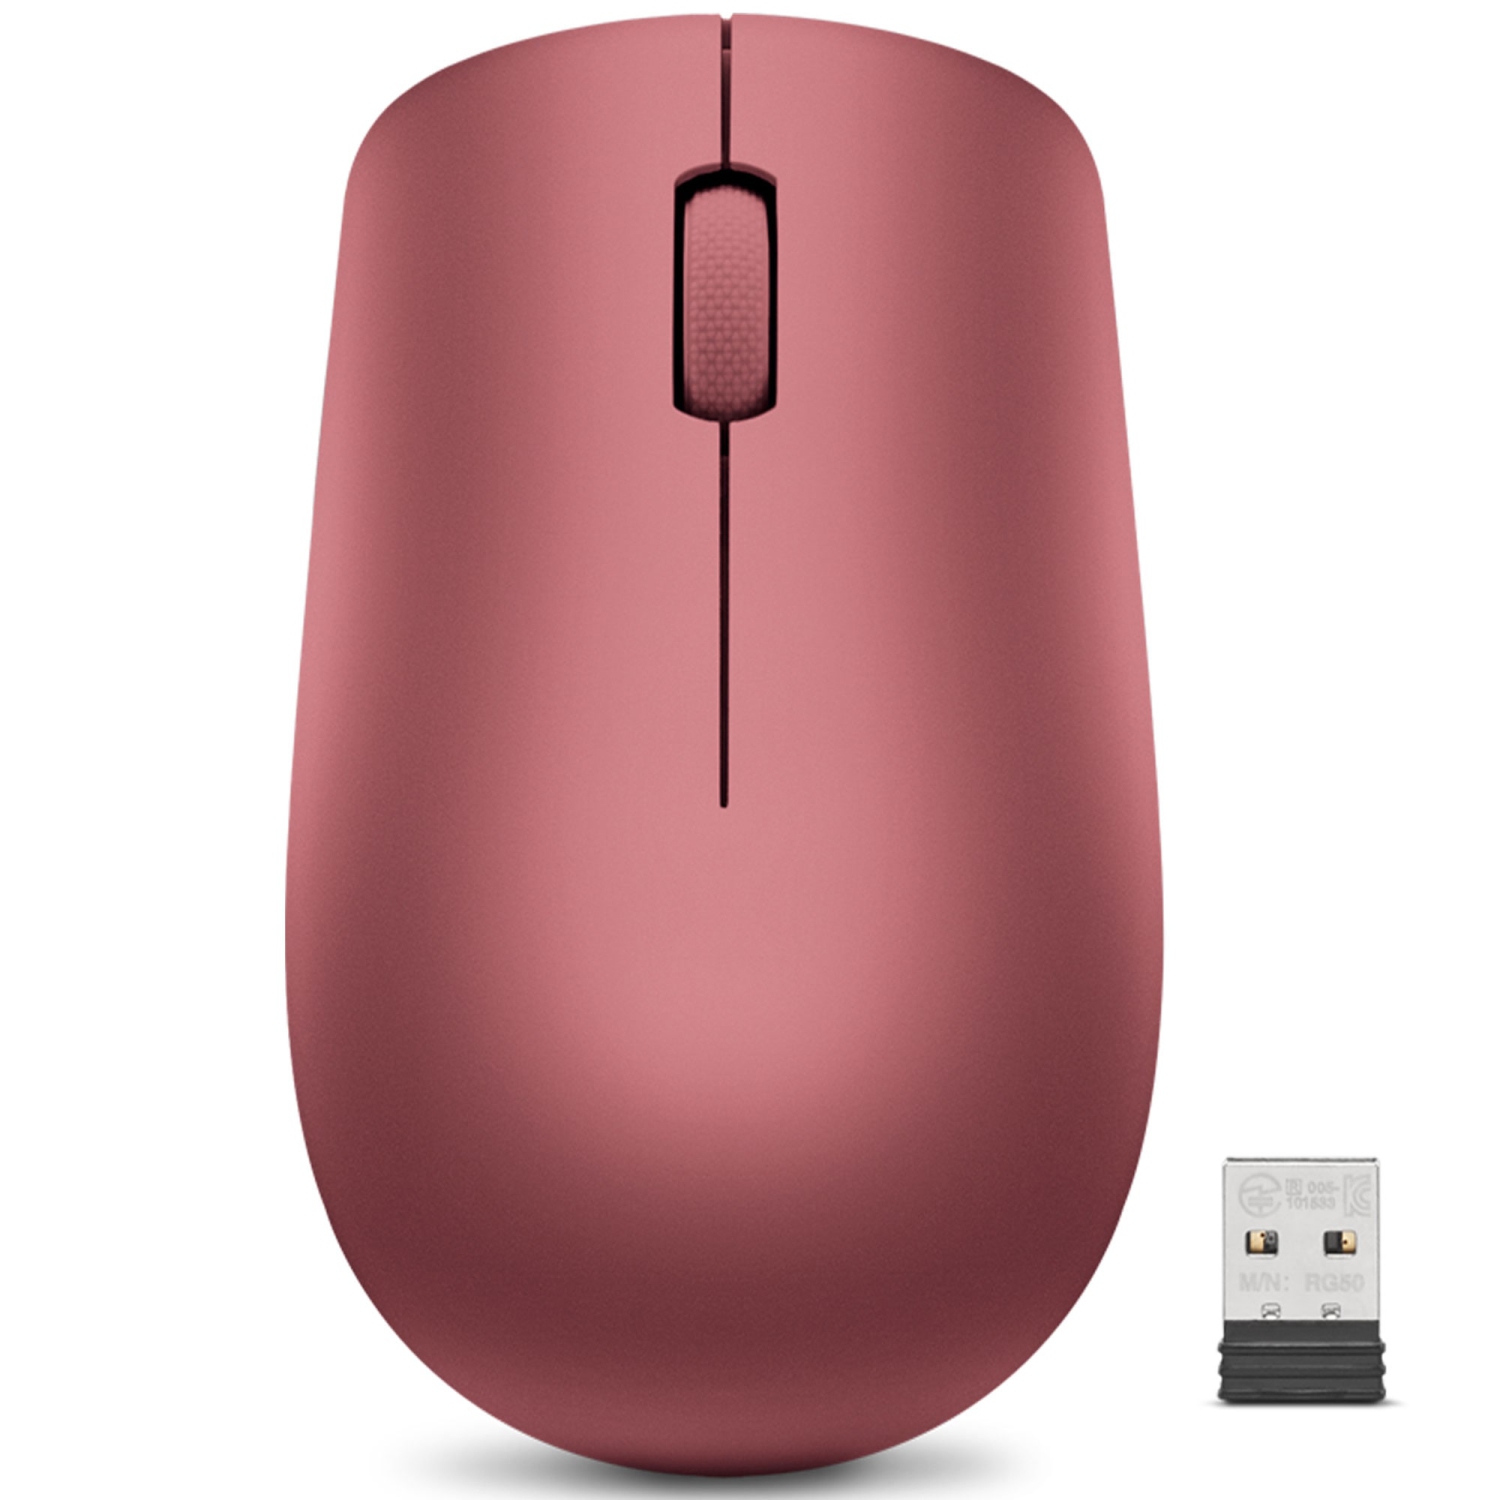 Lenovo 530 Wireless Mouse (Cherry Red)